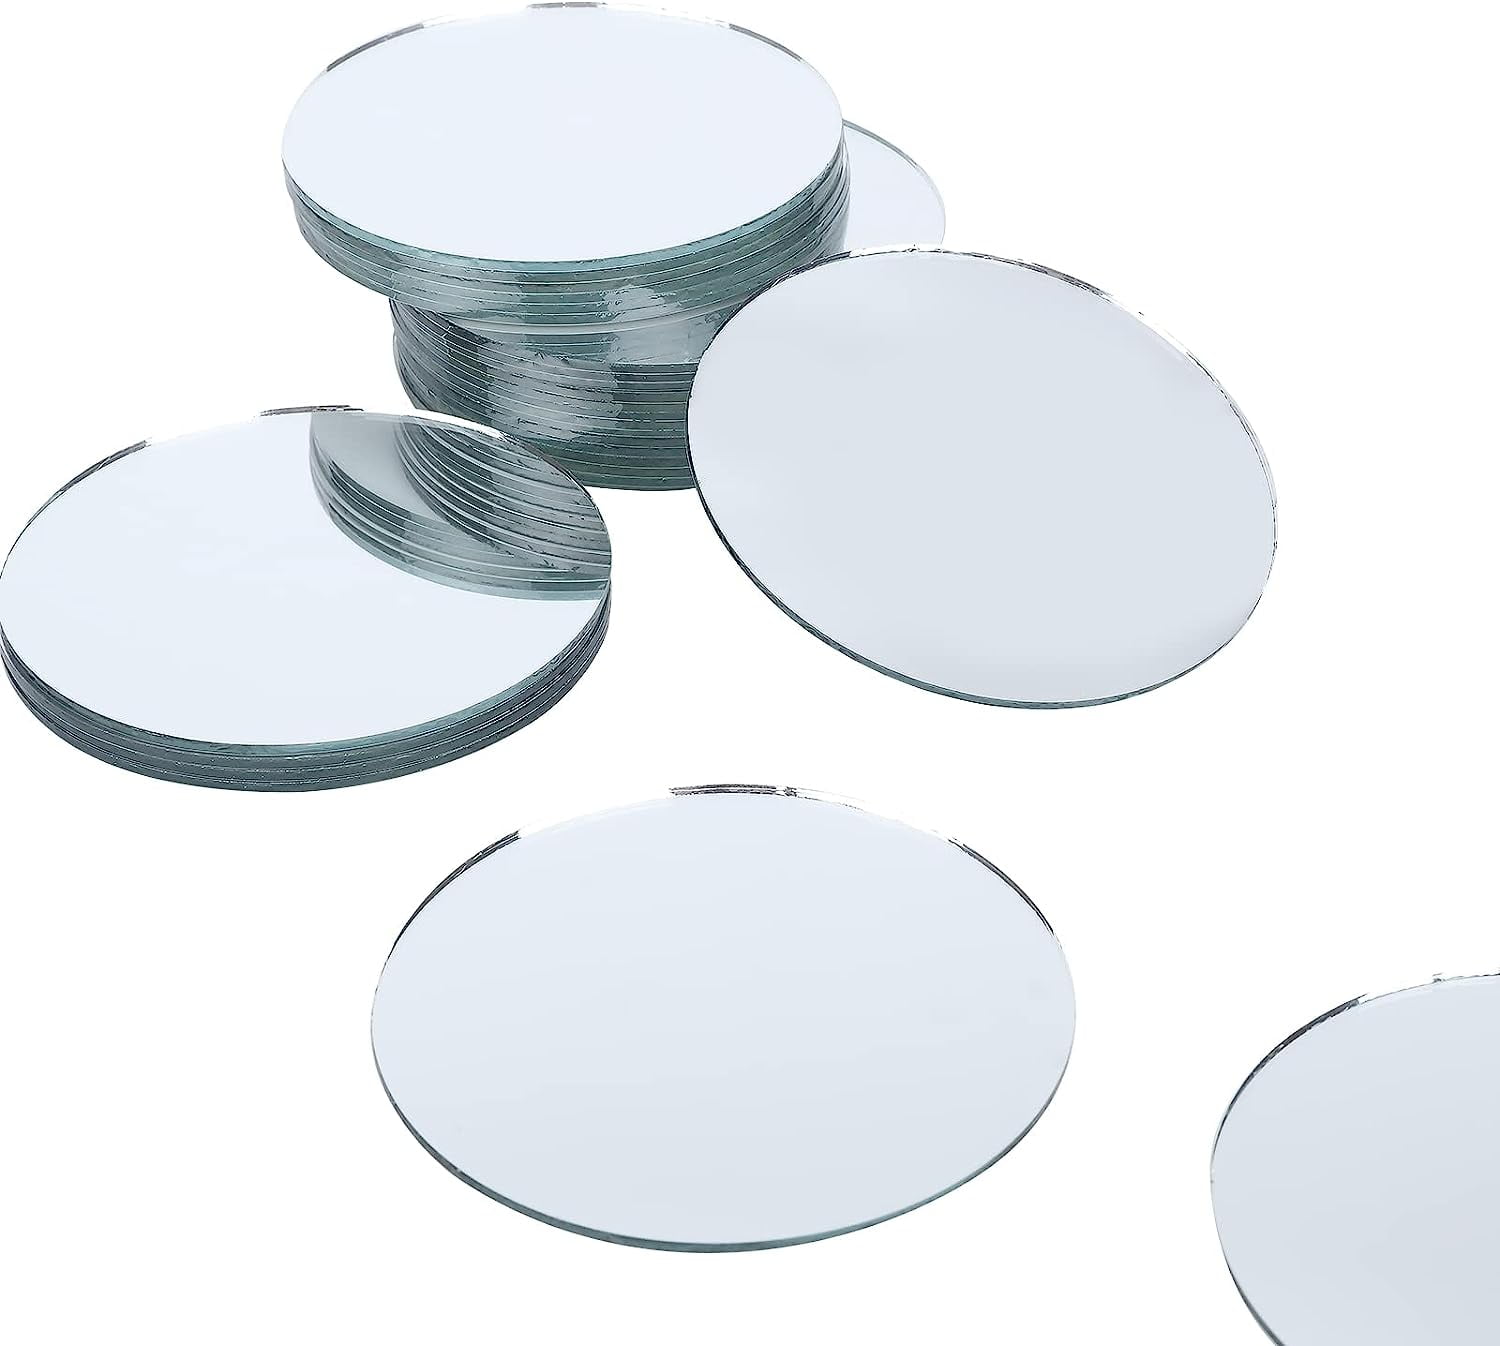 30pcs Small Circle Mirror Tiles White Mini Round Glass Mirror for Arts Crafts Projects Traveling